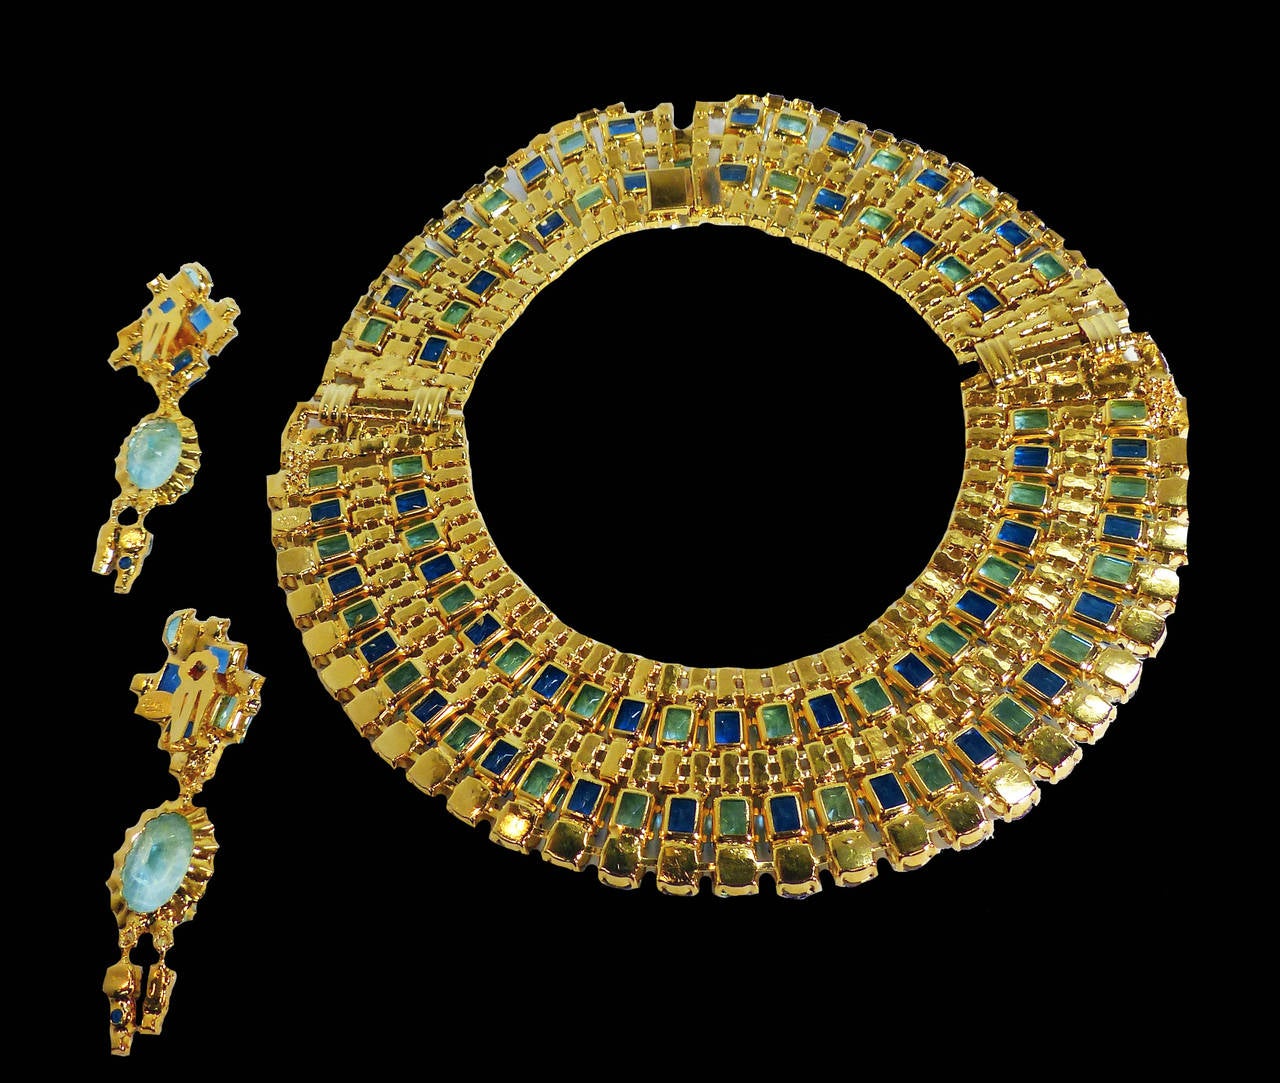 This one-of-a-kind set by Robert Sorrell features blue, green and clear crystals in a gold-tone setting.  The necklace measures 16” x 1 ¾” with a pressure closure; the clip earrings are 3 ¼” x 1 ¼”.  In excellent condition, this set is signed